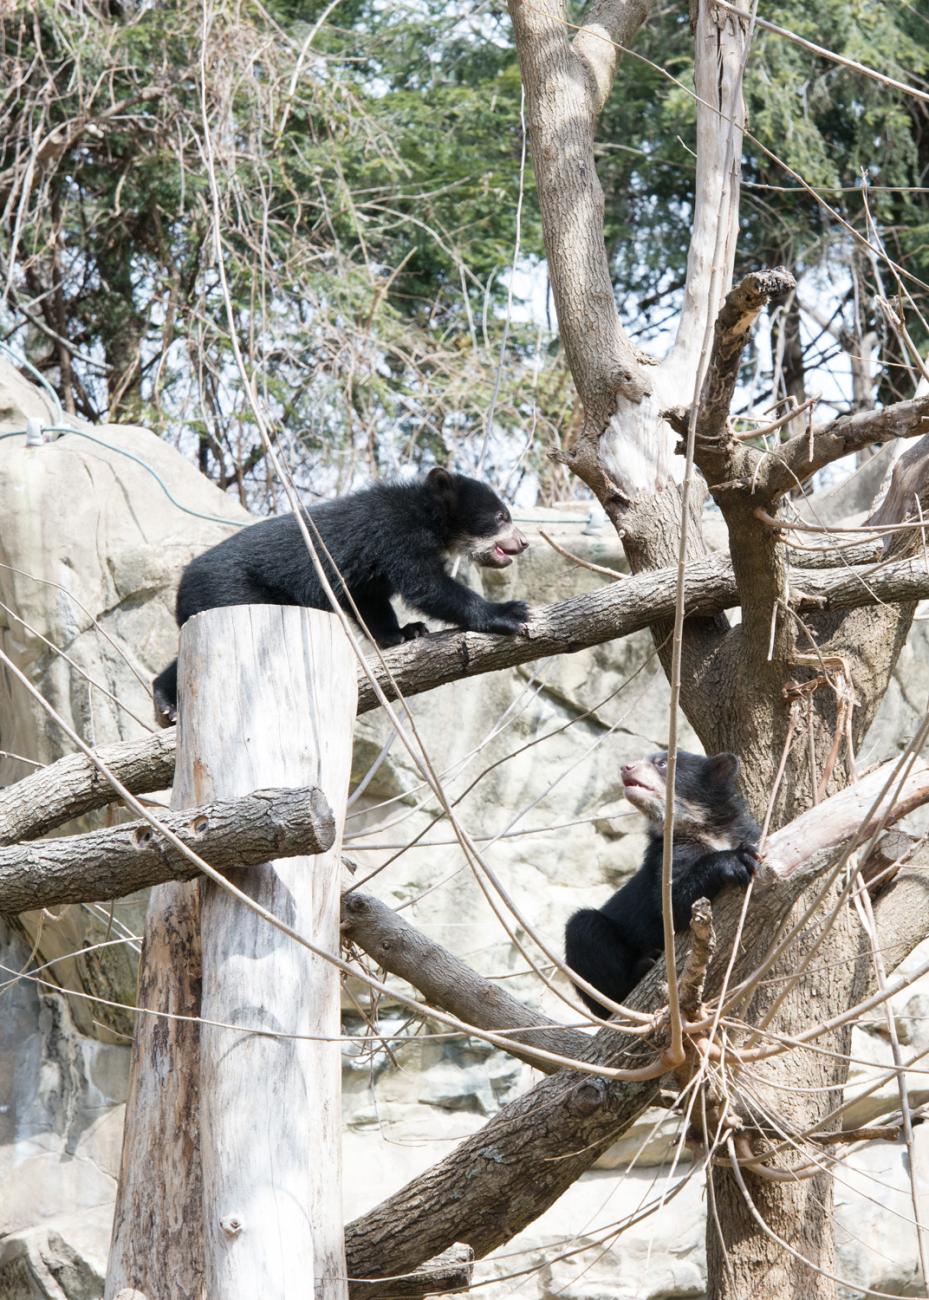 bear cub walks across horizontal branch to other tree in its enclosure